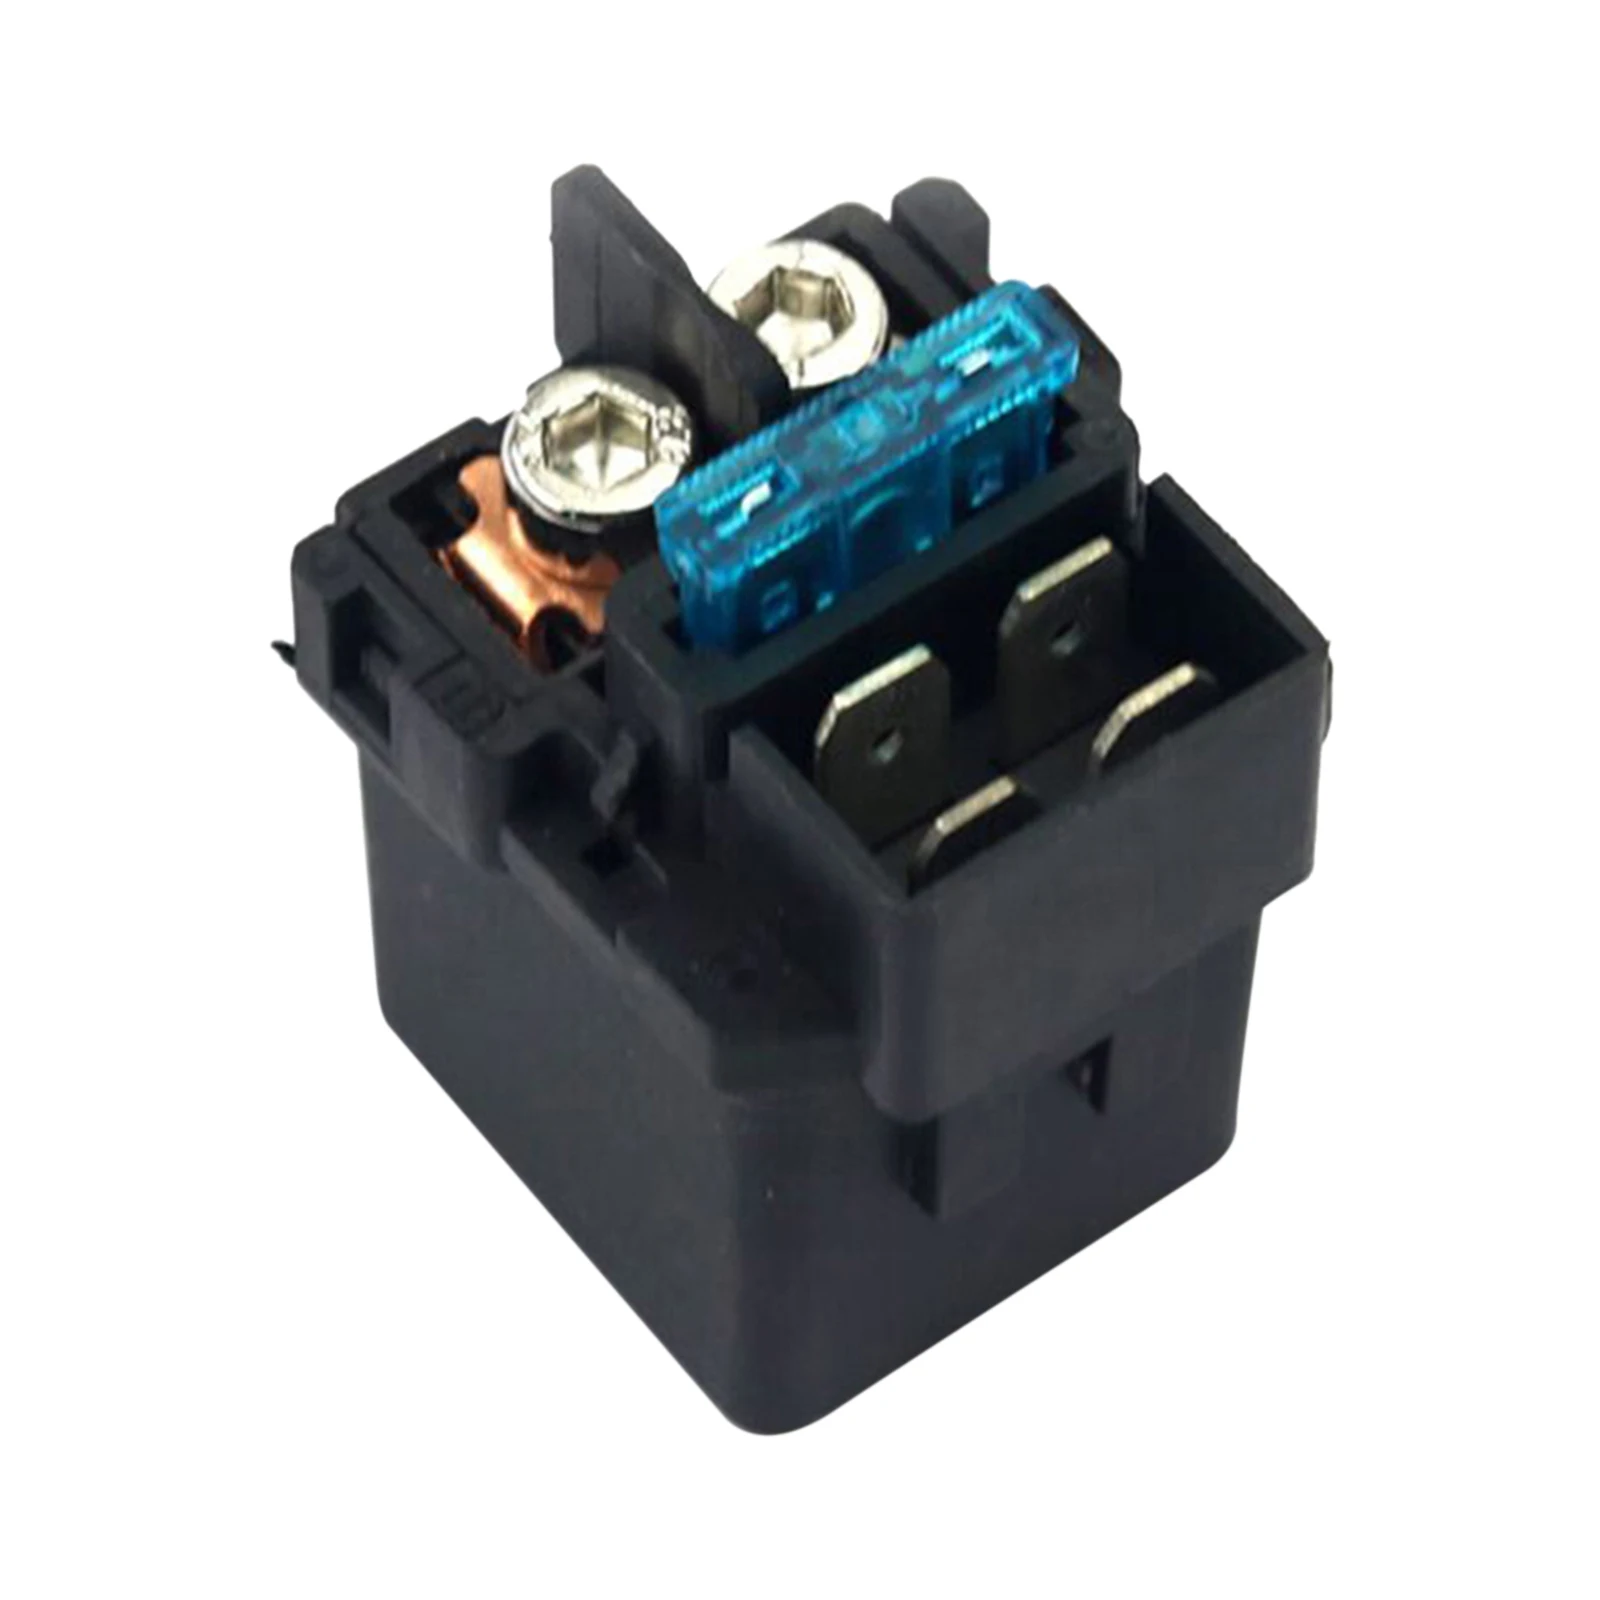 FZ16 Starter Relay Solenoid Voltage Starter Relay for Yamaha FZ 16 FZ-16 YS150 Motorcycle Accessories ABS Plastic and Metal